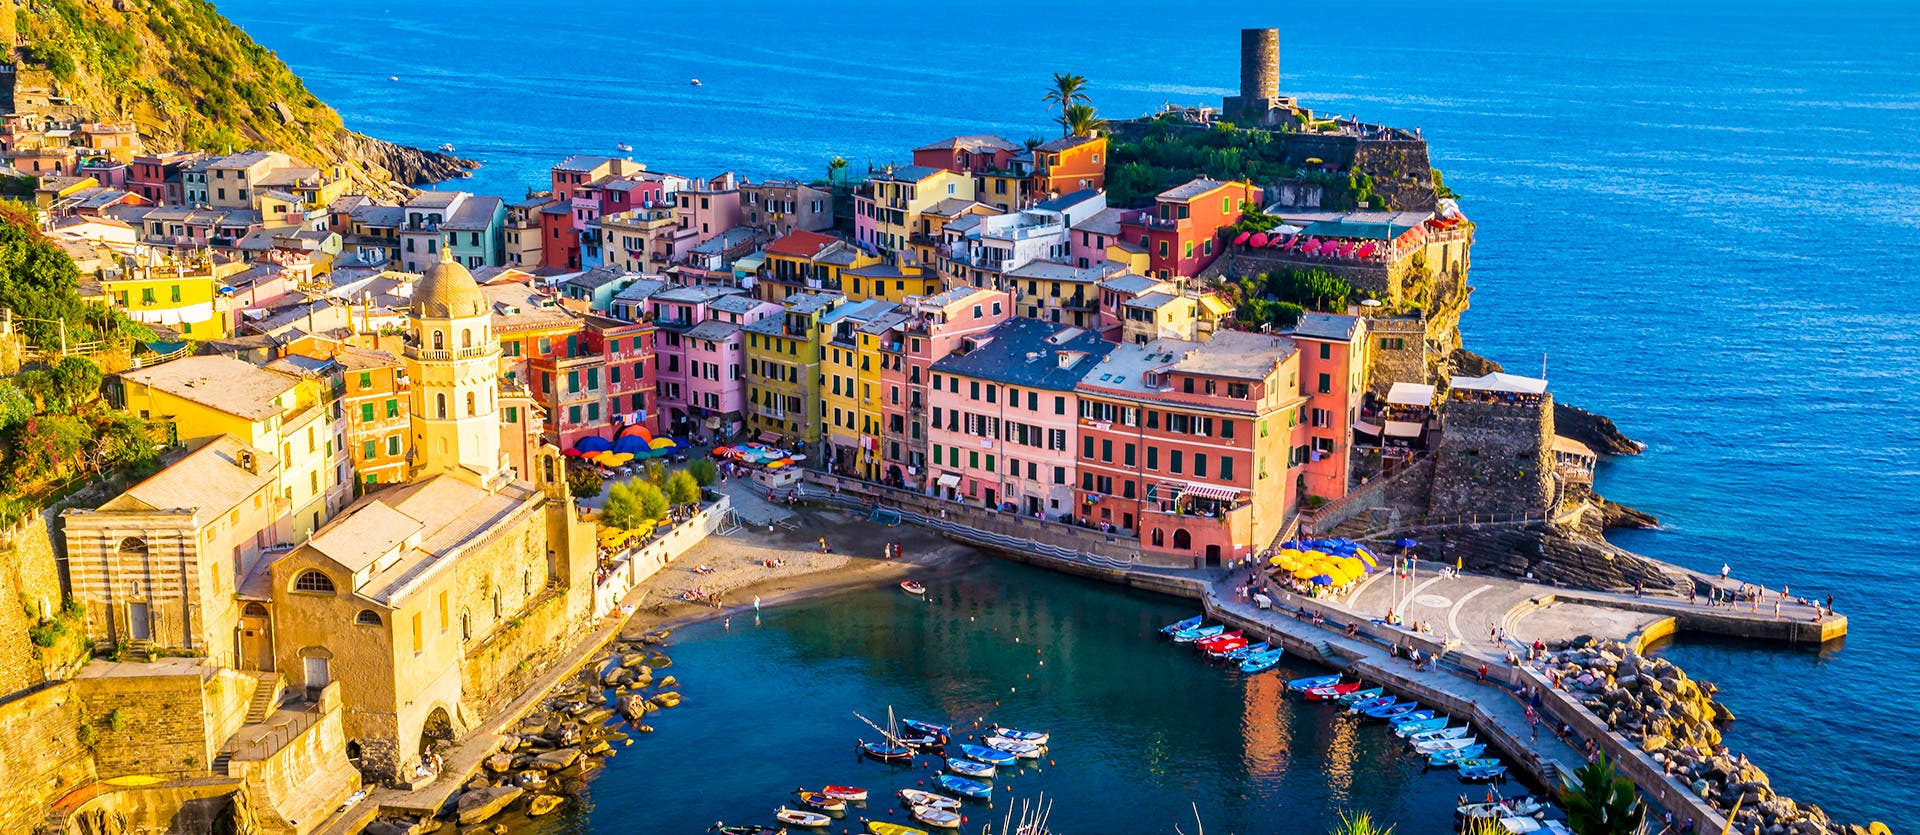 What to see in Italie Cinque Terre